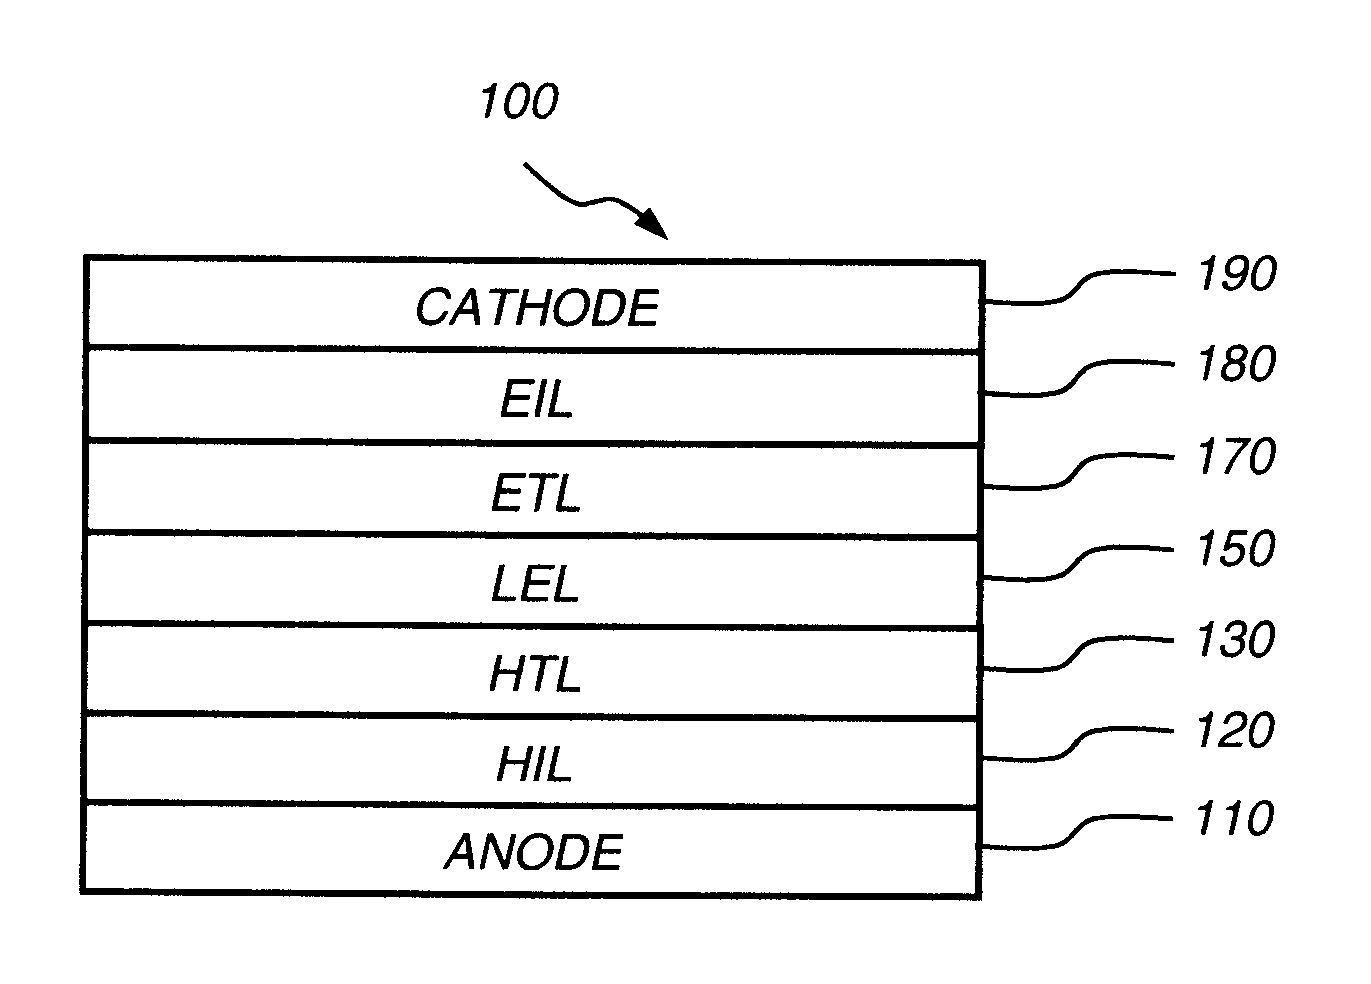 Hole-injecting layer in oleds